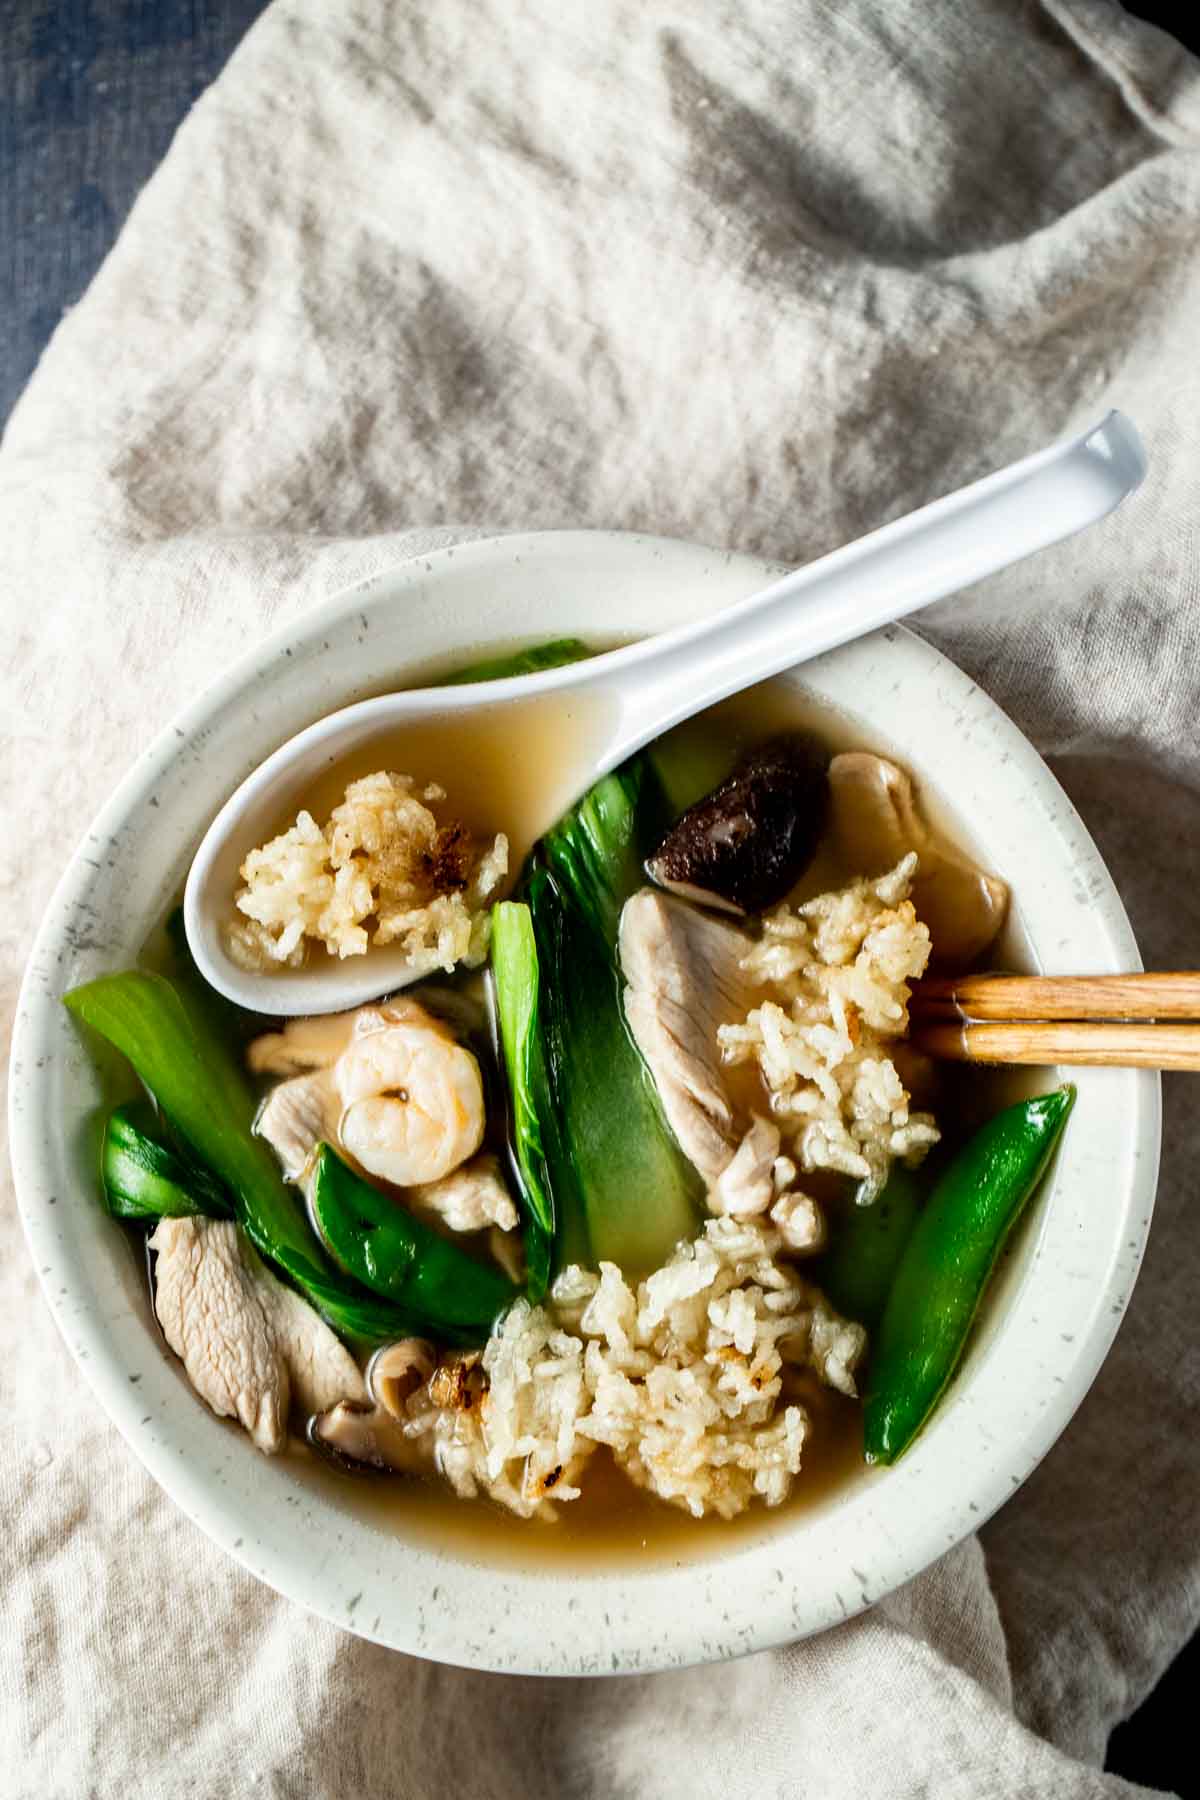 https://www.wenthere8this.com/wp-content/uploads/2023/01/sizzling-rice-soup-8-1.jpg